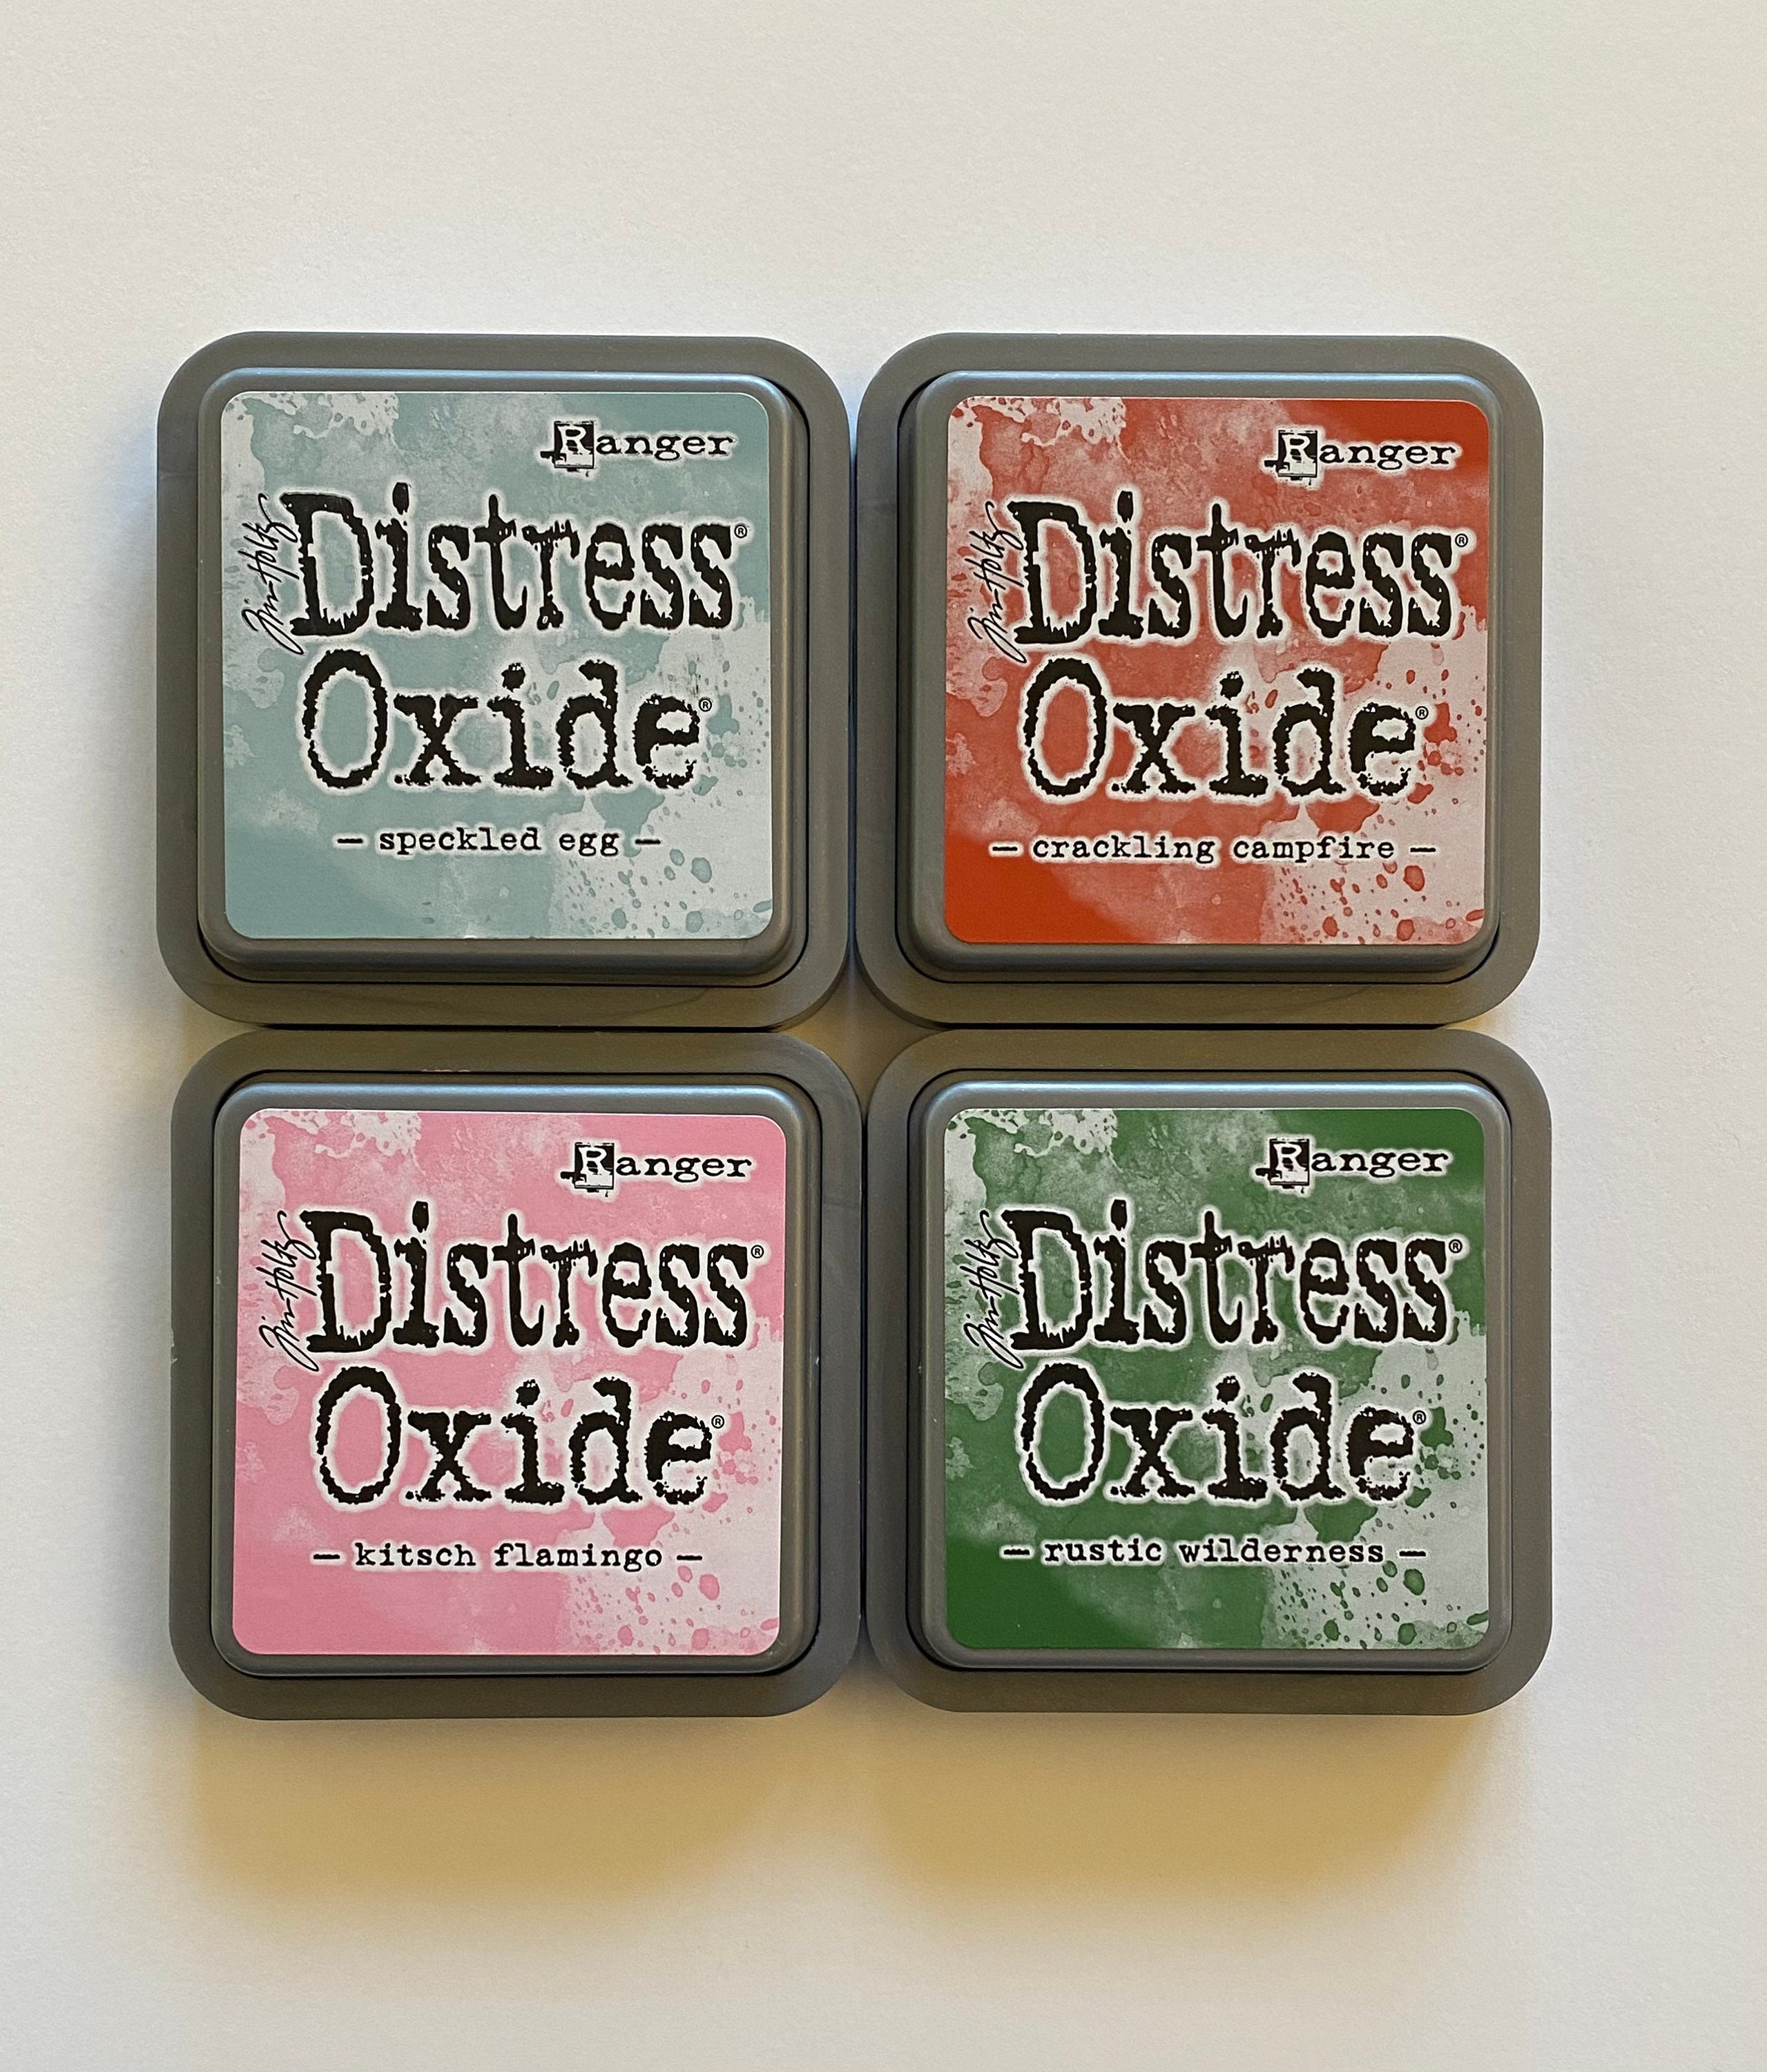 TIM HOLTZ DISTRESS, Oxide Ink Pads, Full Size, 29 Colors to Choose From,  Inkpads, Stamp Ink Pad, Scrapbooking, Painting, Factory Sealed, New 